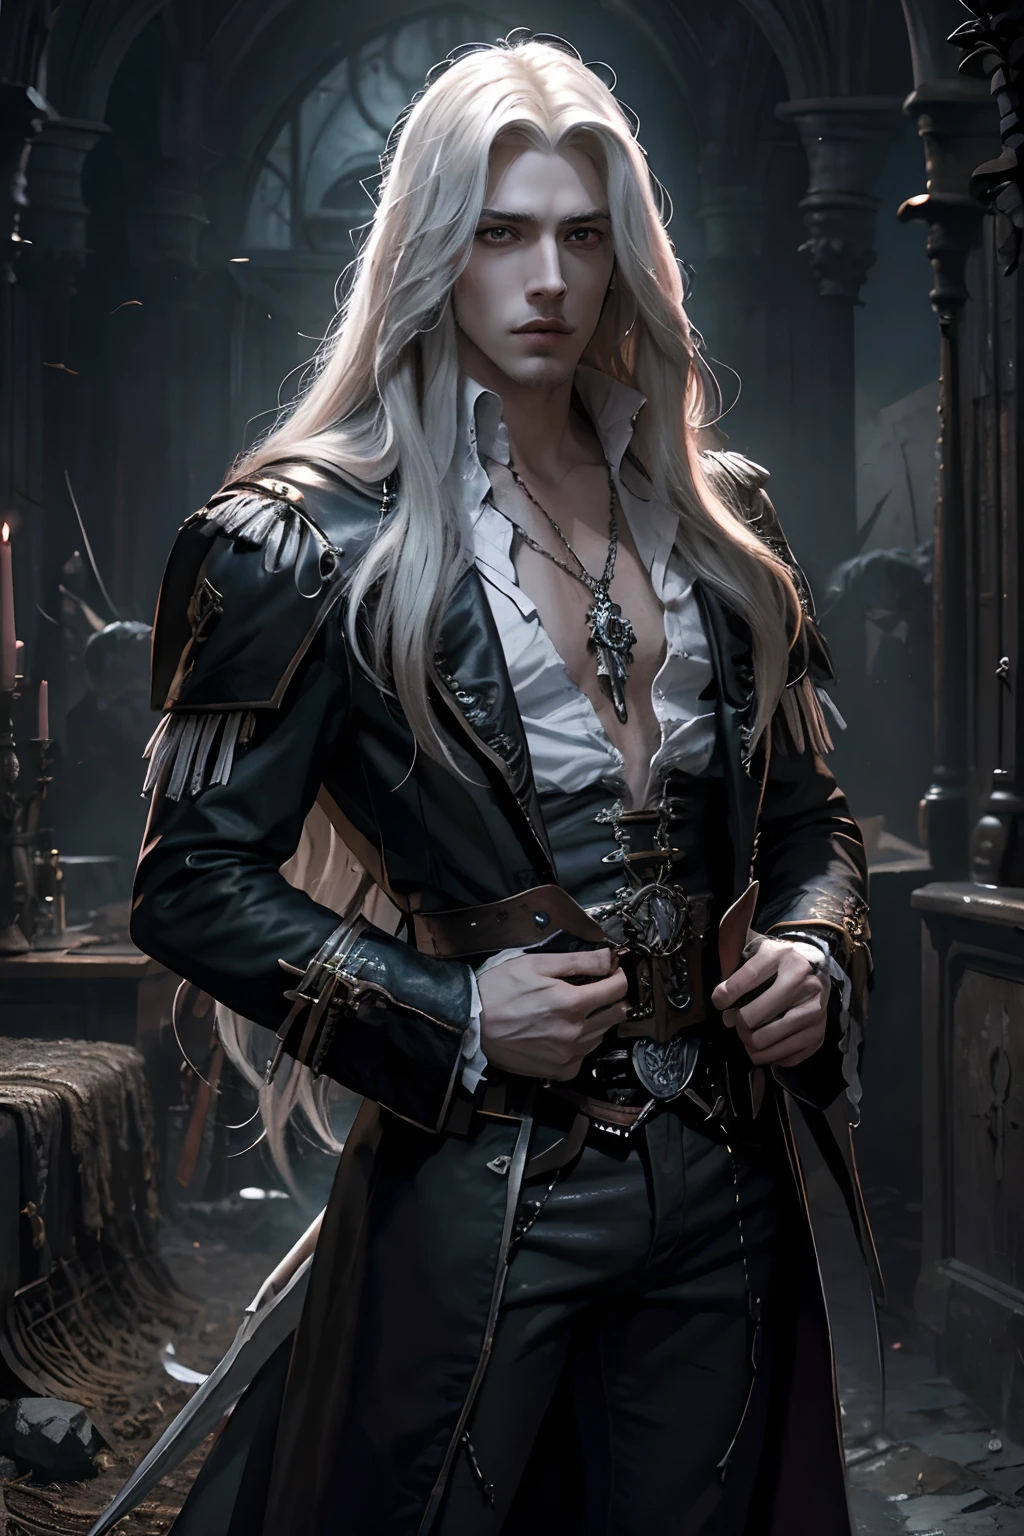 The best quality, Masterpiece, (realist:1.2), a man with white hair and a sword, alucard, Beautiful male god of death,  castlevania, Detailed anime character art, Castelvania,  Sotn, epic exquisite character art, Arte Zerochan, Detailed art on a battlefield at night